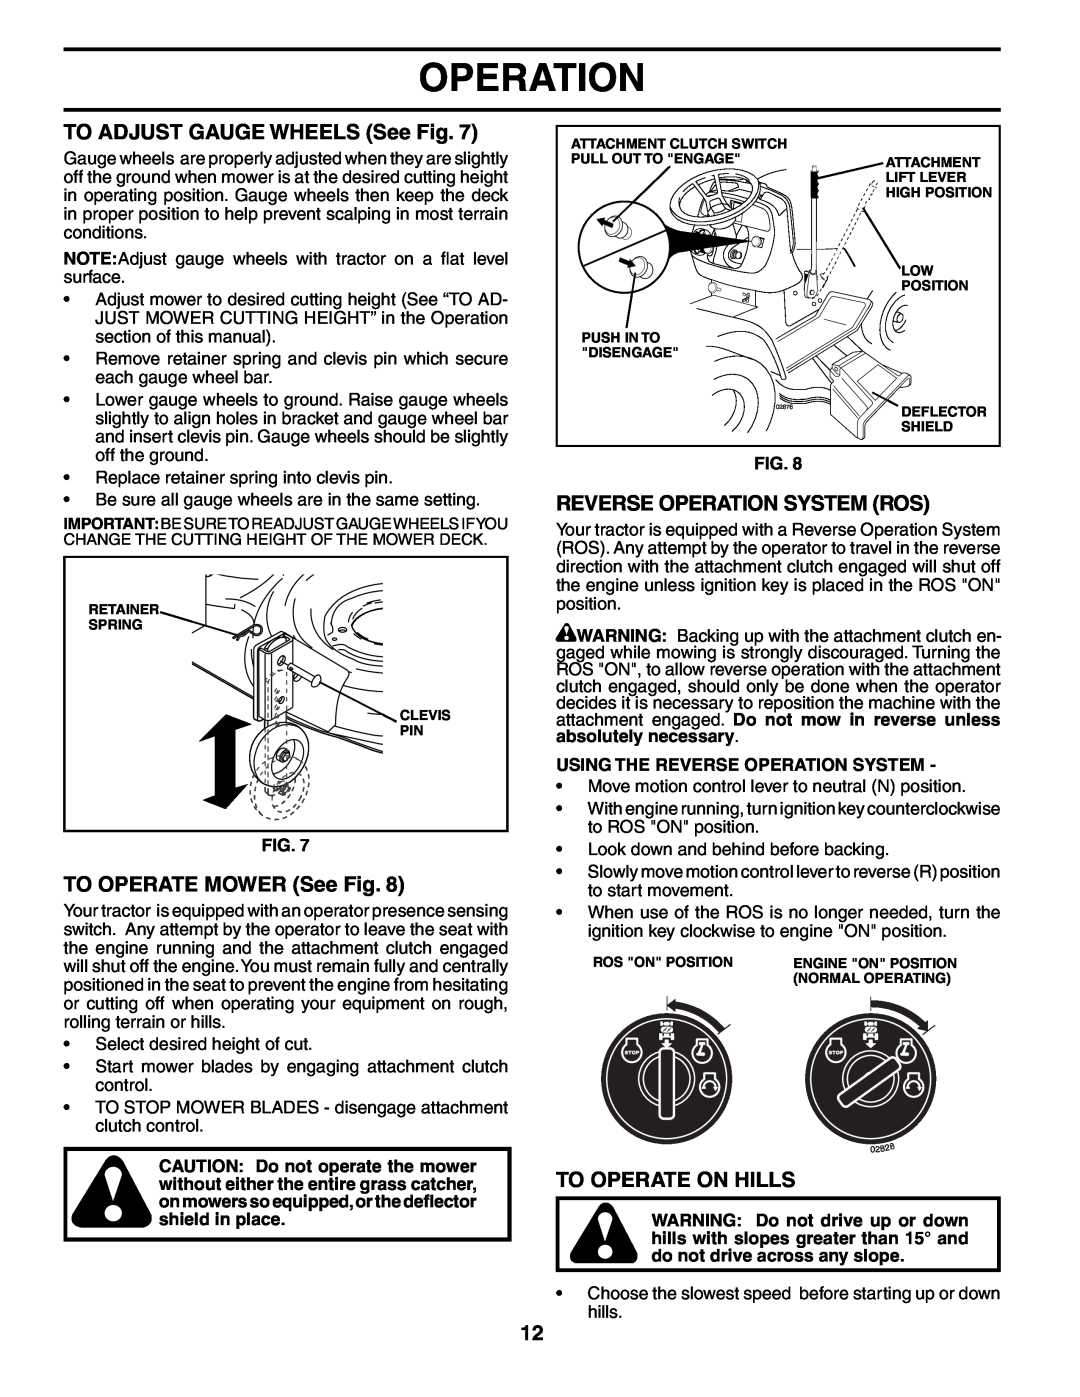 Poulan DB24H42YT manual TO ADJUST GAUGE WHEELS See Fig, TO OPERATE MOWER See Fig, Reverse Operation System Ros 